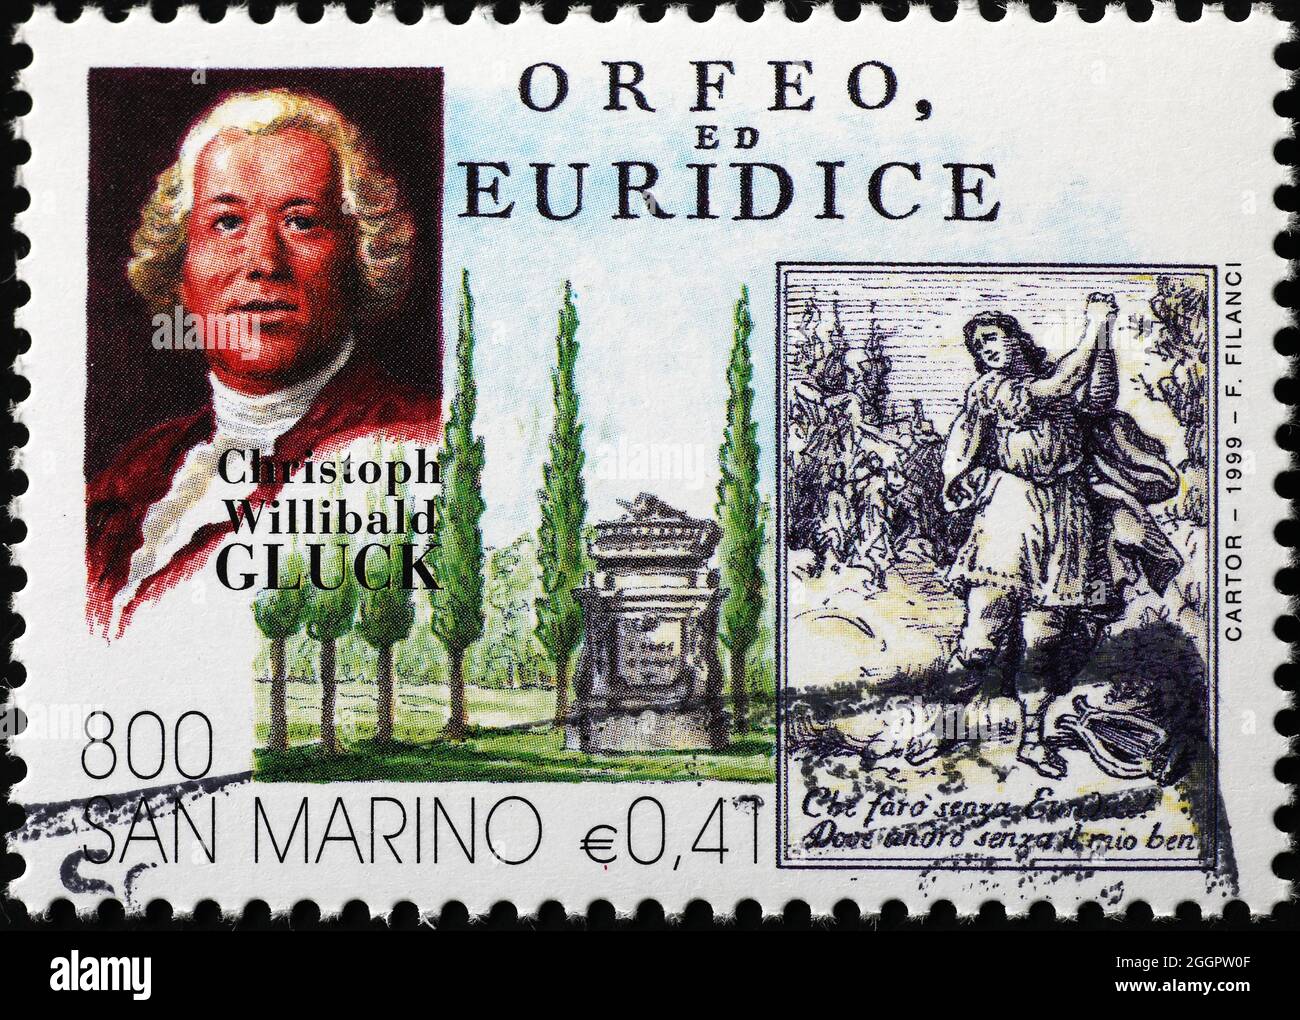 Christoph Willibald Gluck and his opera Orfeo and Euridice on stamp Stock Photo